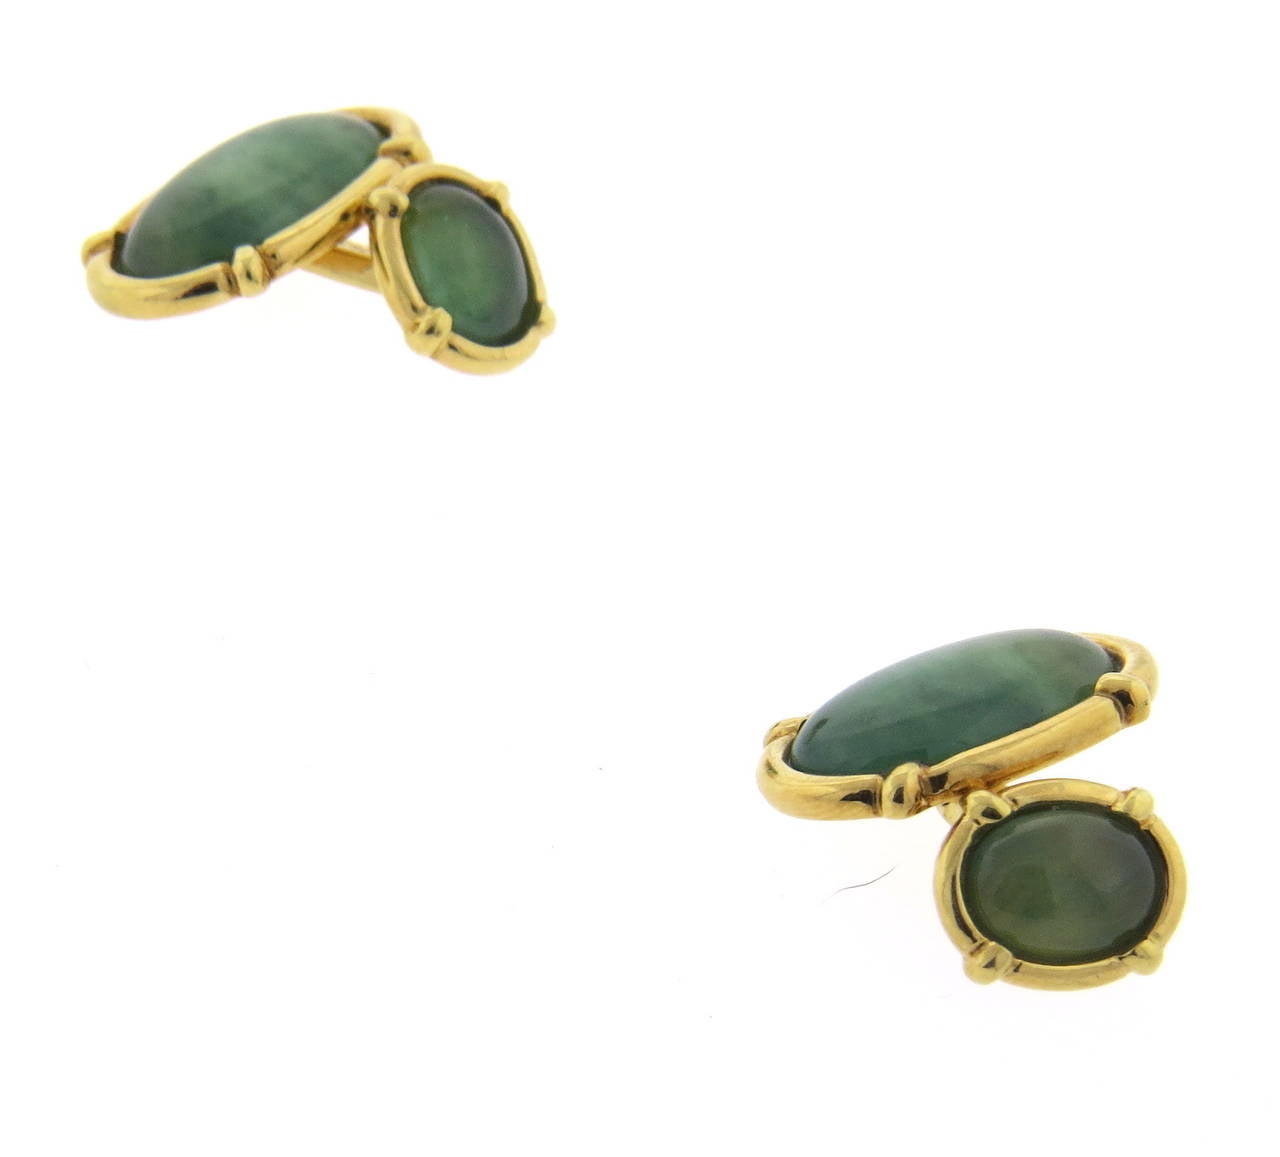 18k gold oval cufflinks with jade gemstones. Top measures 19mm x 13mm, back - 10mm x 8mm. Weight - 13 grams